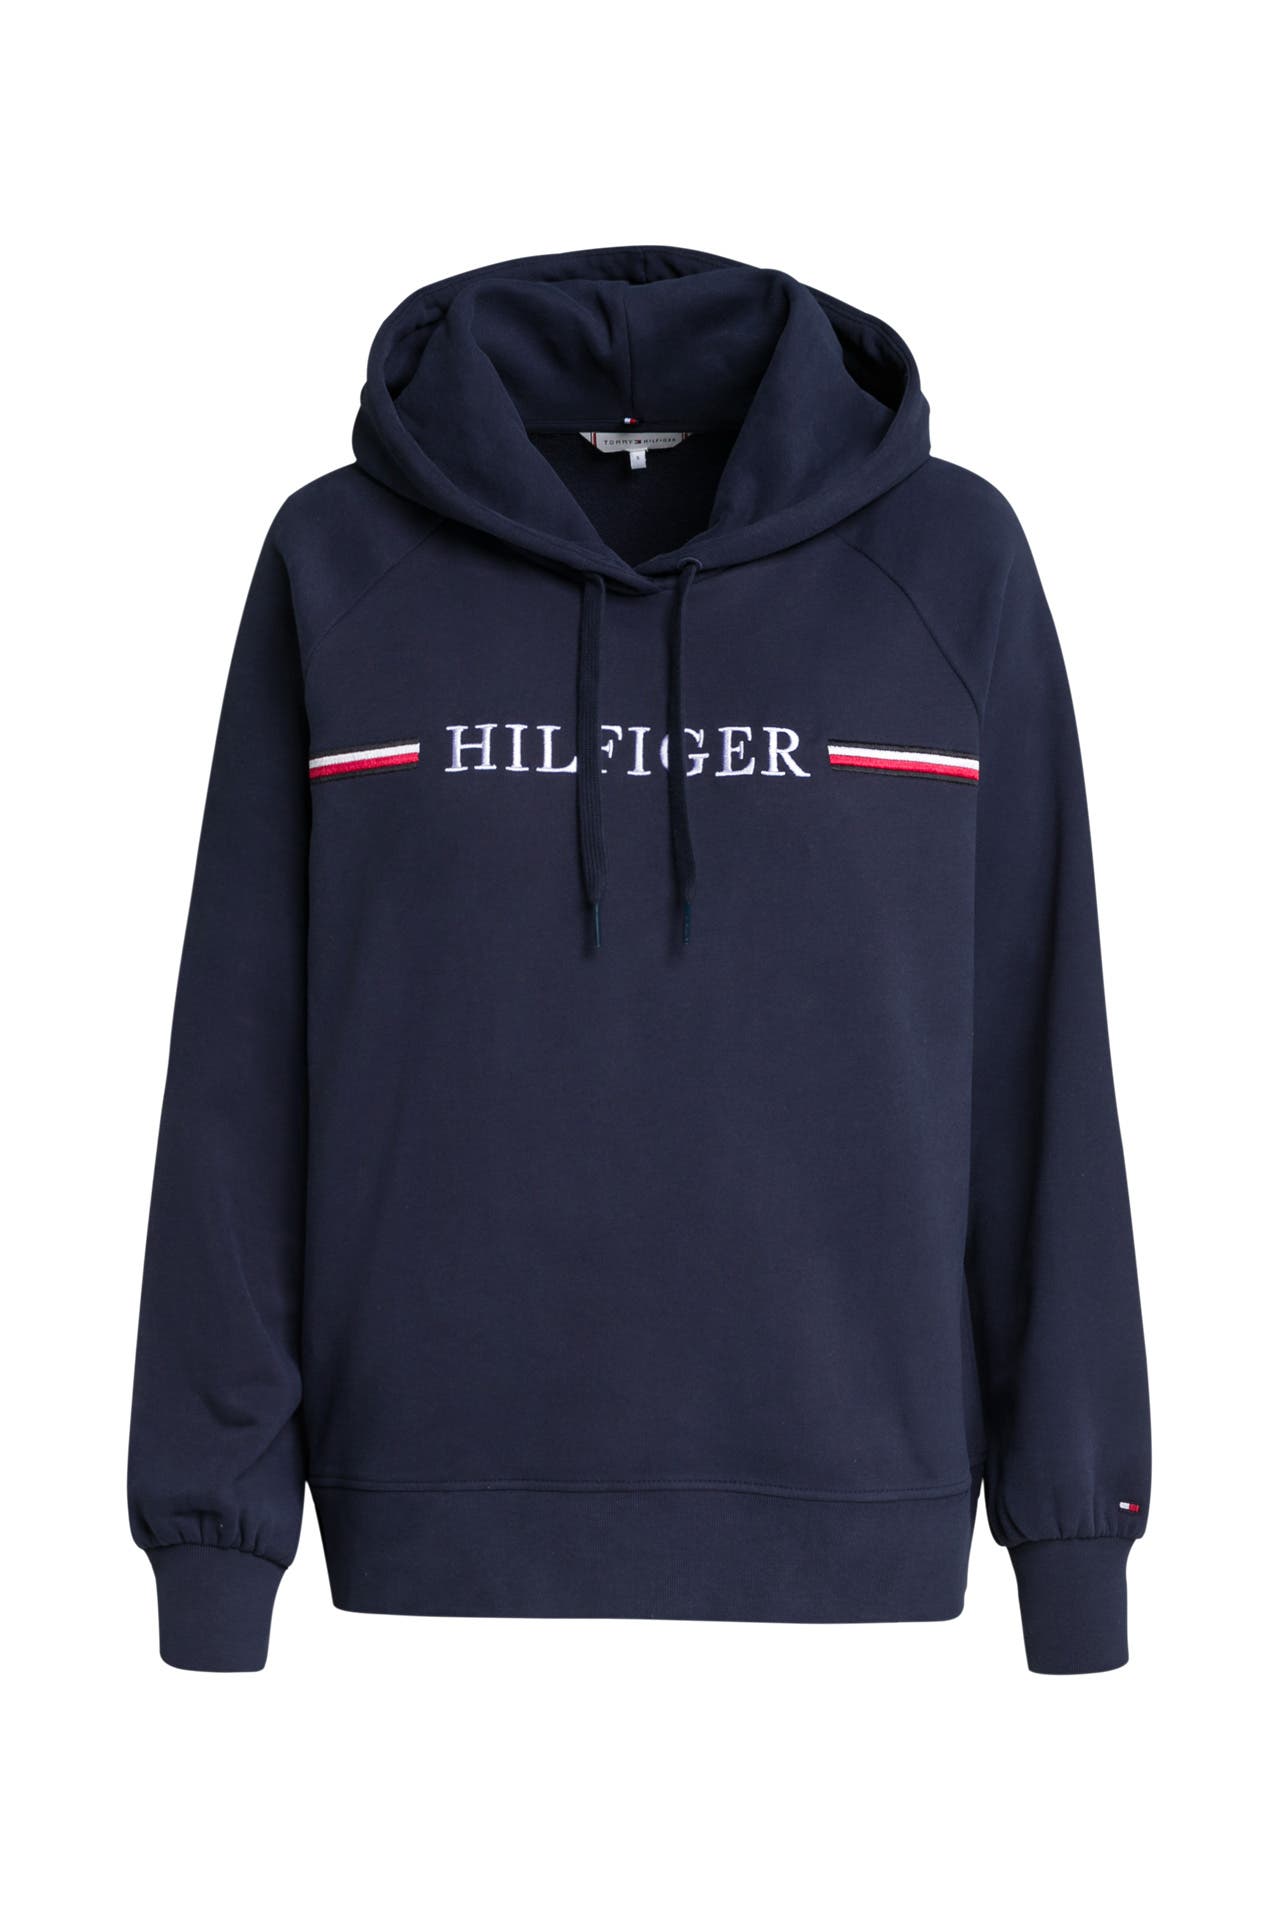 inflatie Sleutel Grazen Tommy Hilfiger OUTLET in Germany » Sale up to 70% off | OUTLETCITY METZINGEN